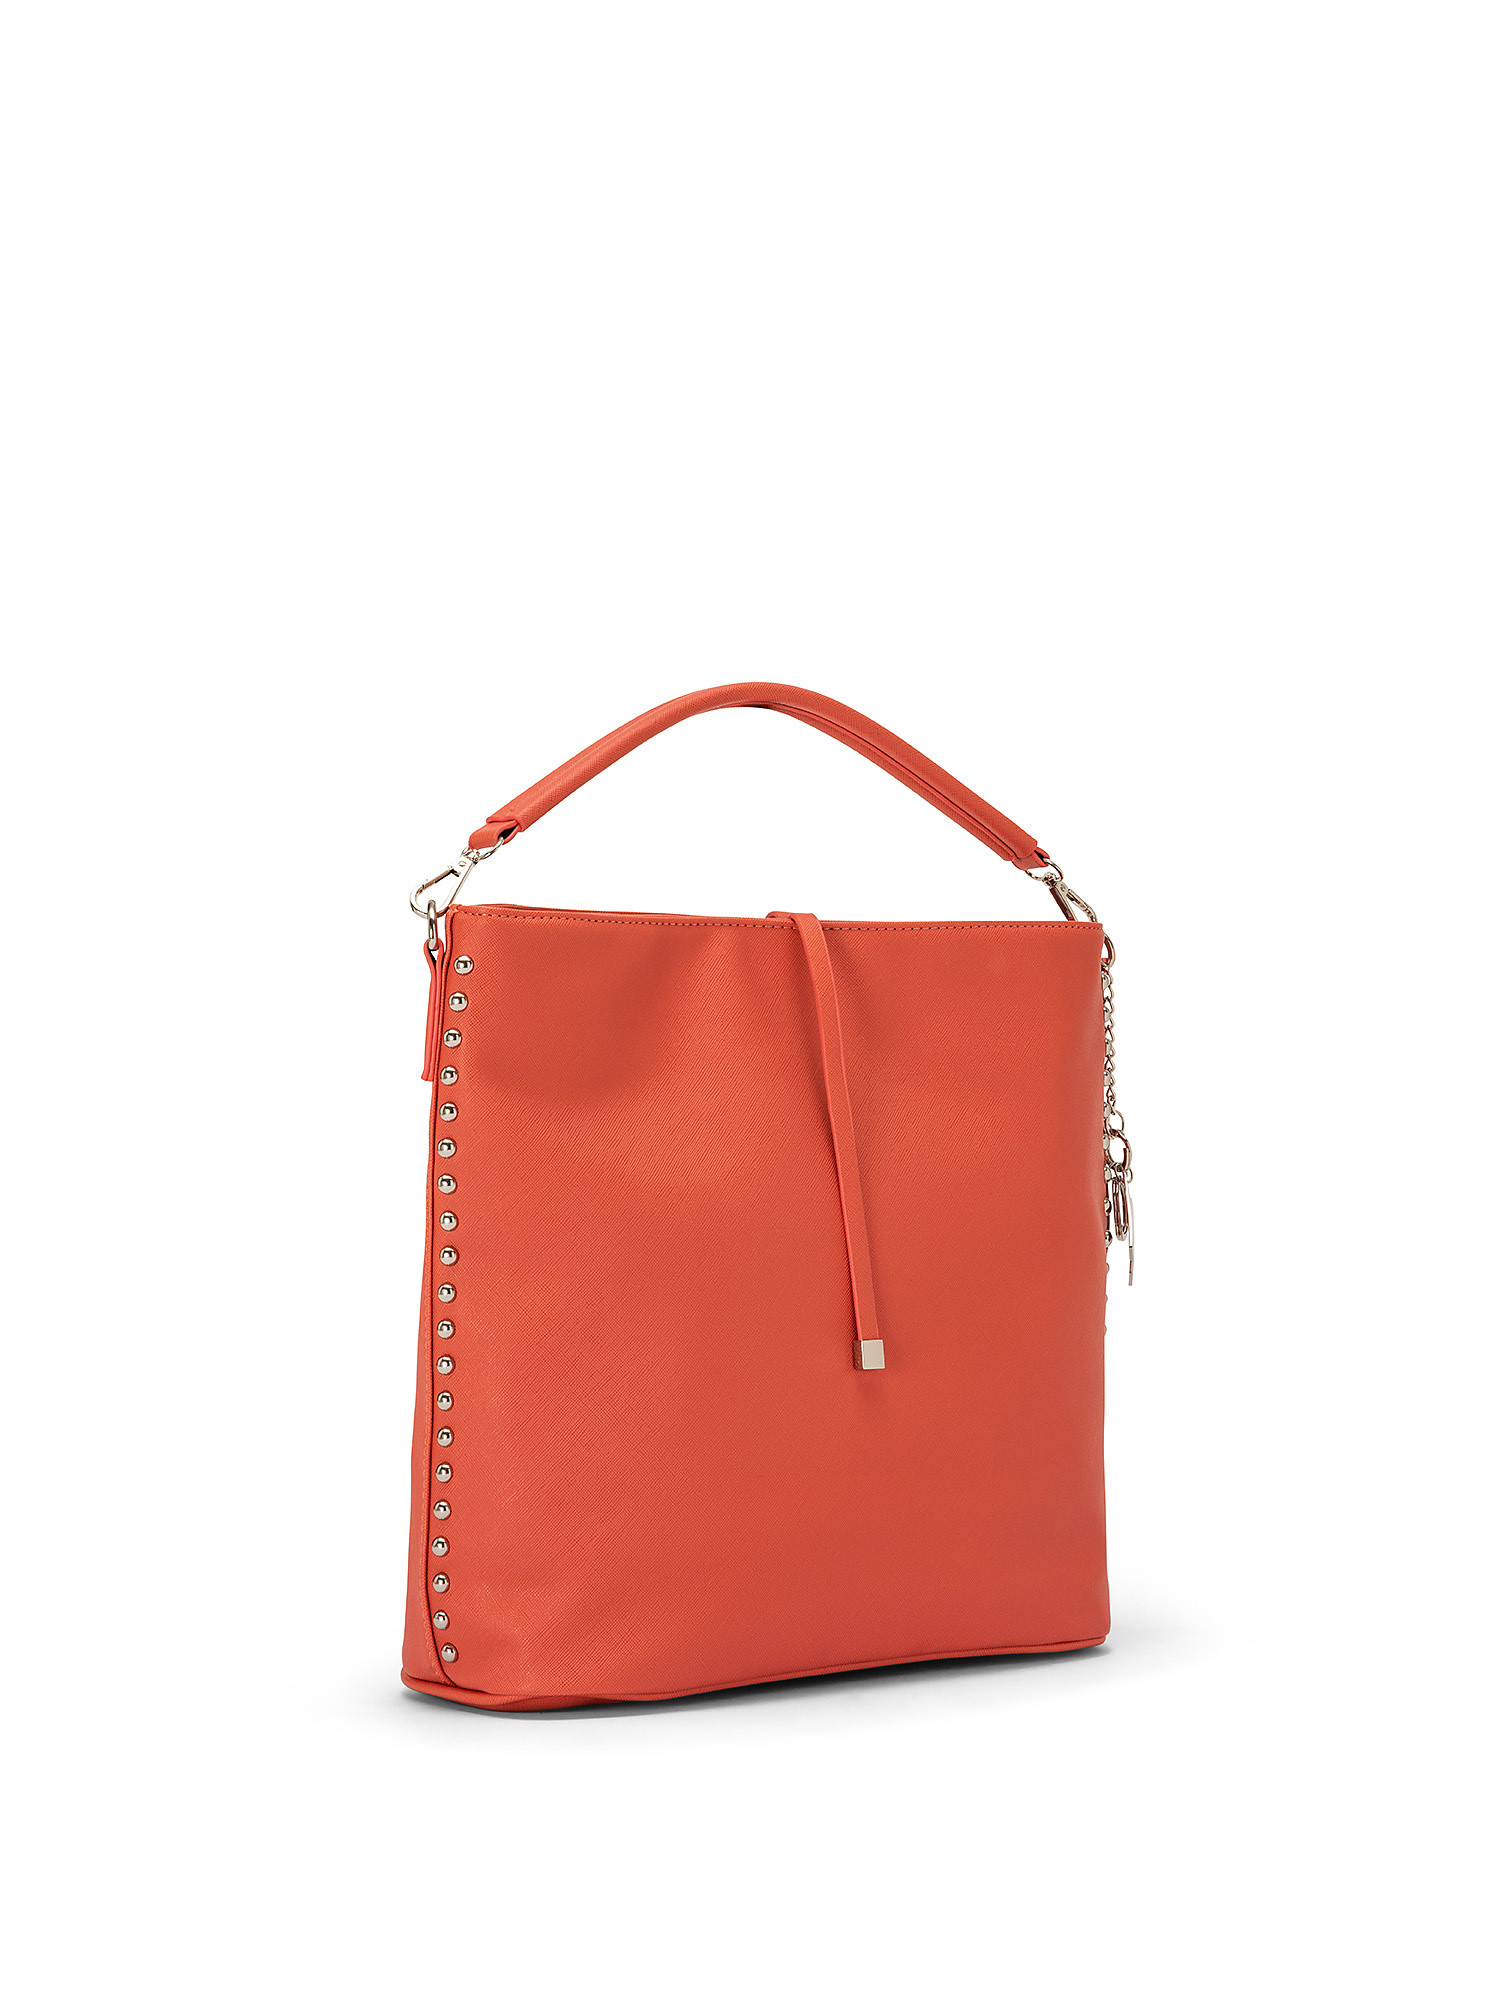 Borsa Hobo, Rosso corallo, large image number 1